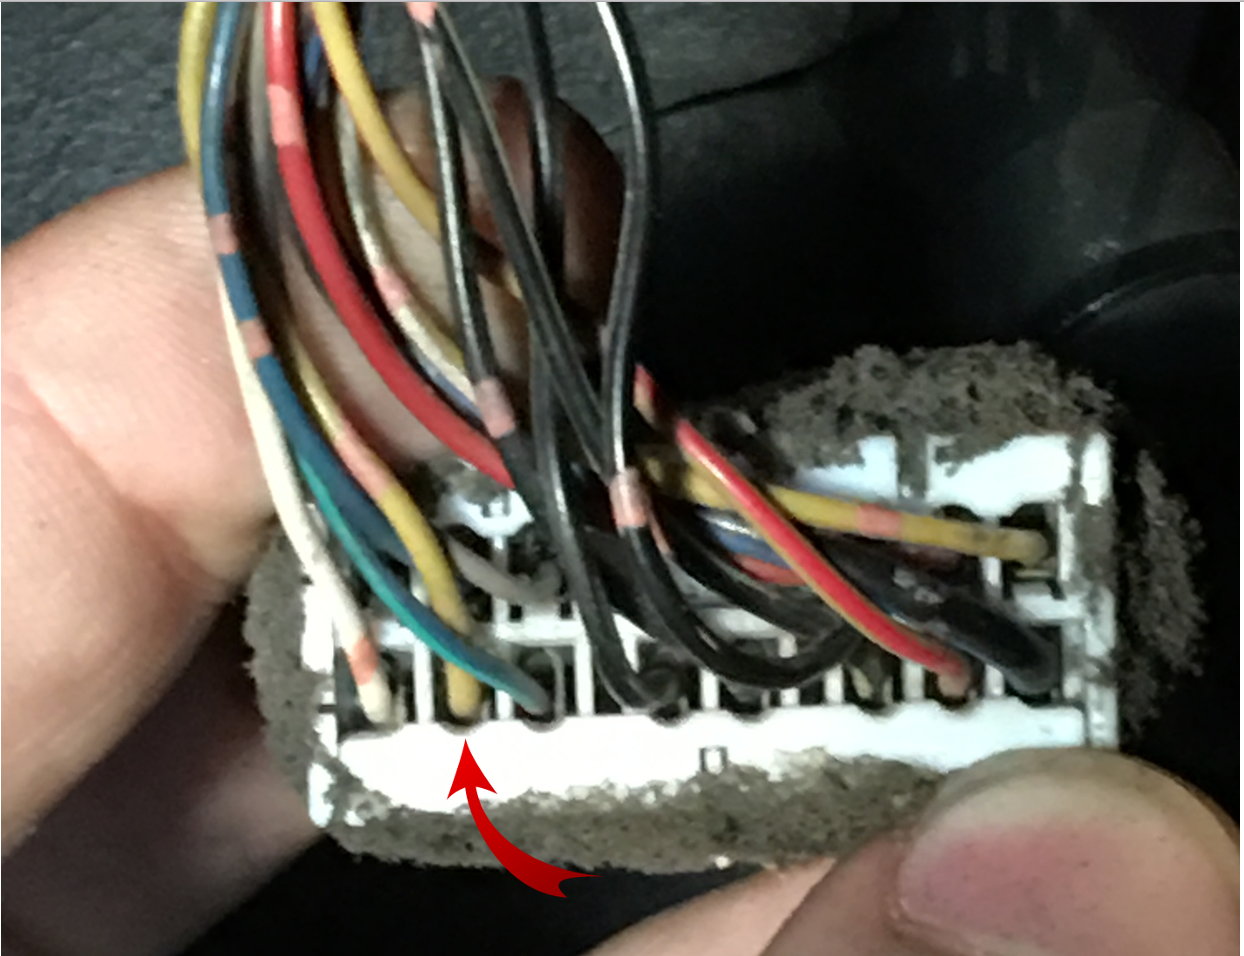 Wiring Question about x-14 connector - RX7Club.com - Mazda RX7 Forum